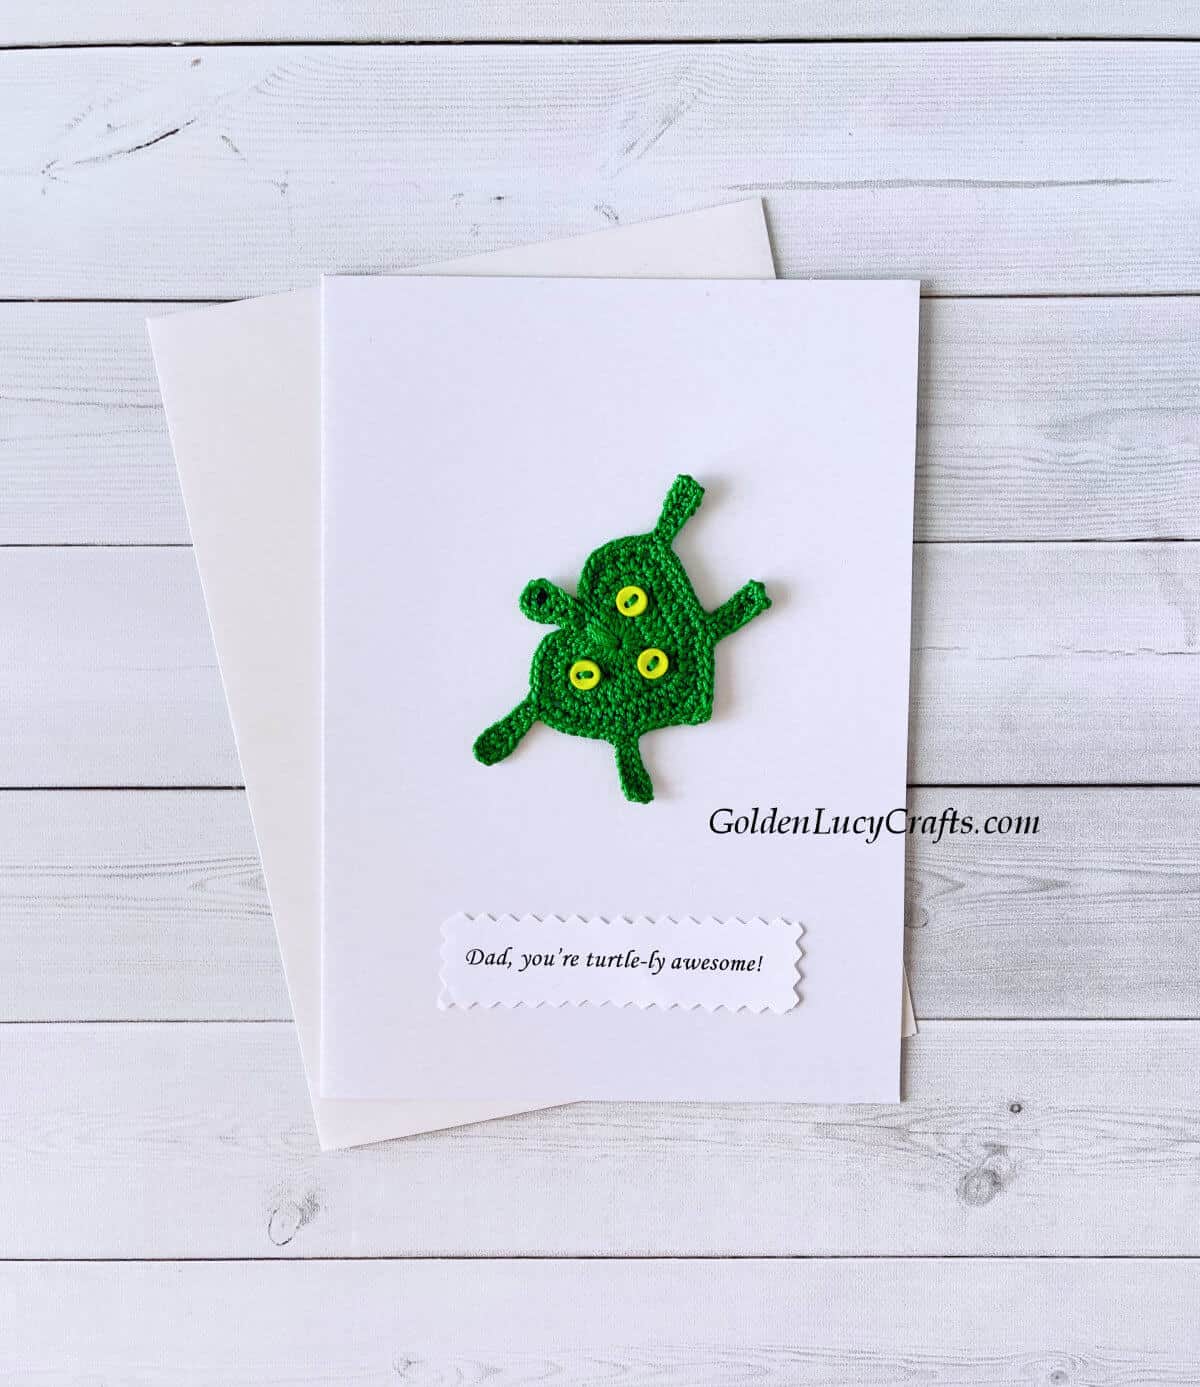 Crochet green turtle applique on a white card with the text "Dad, you are turtlely awesome!"